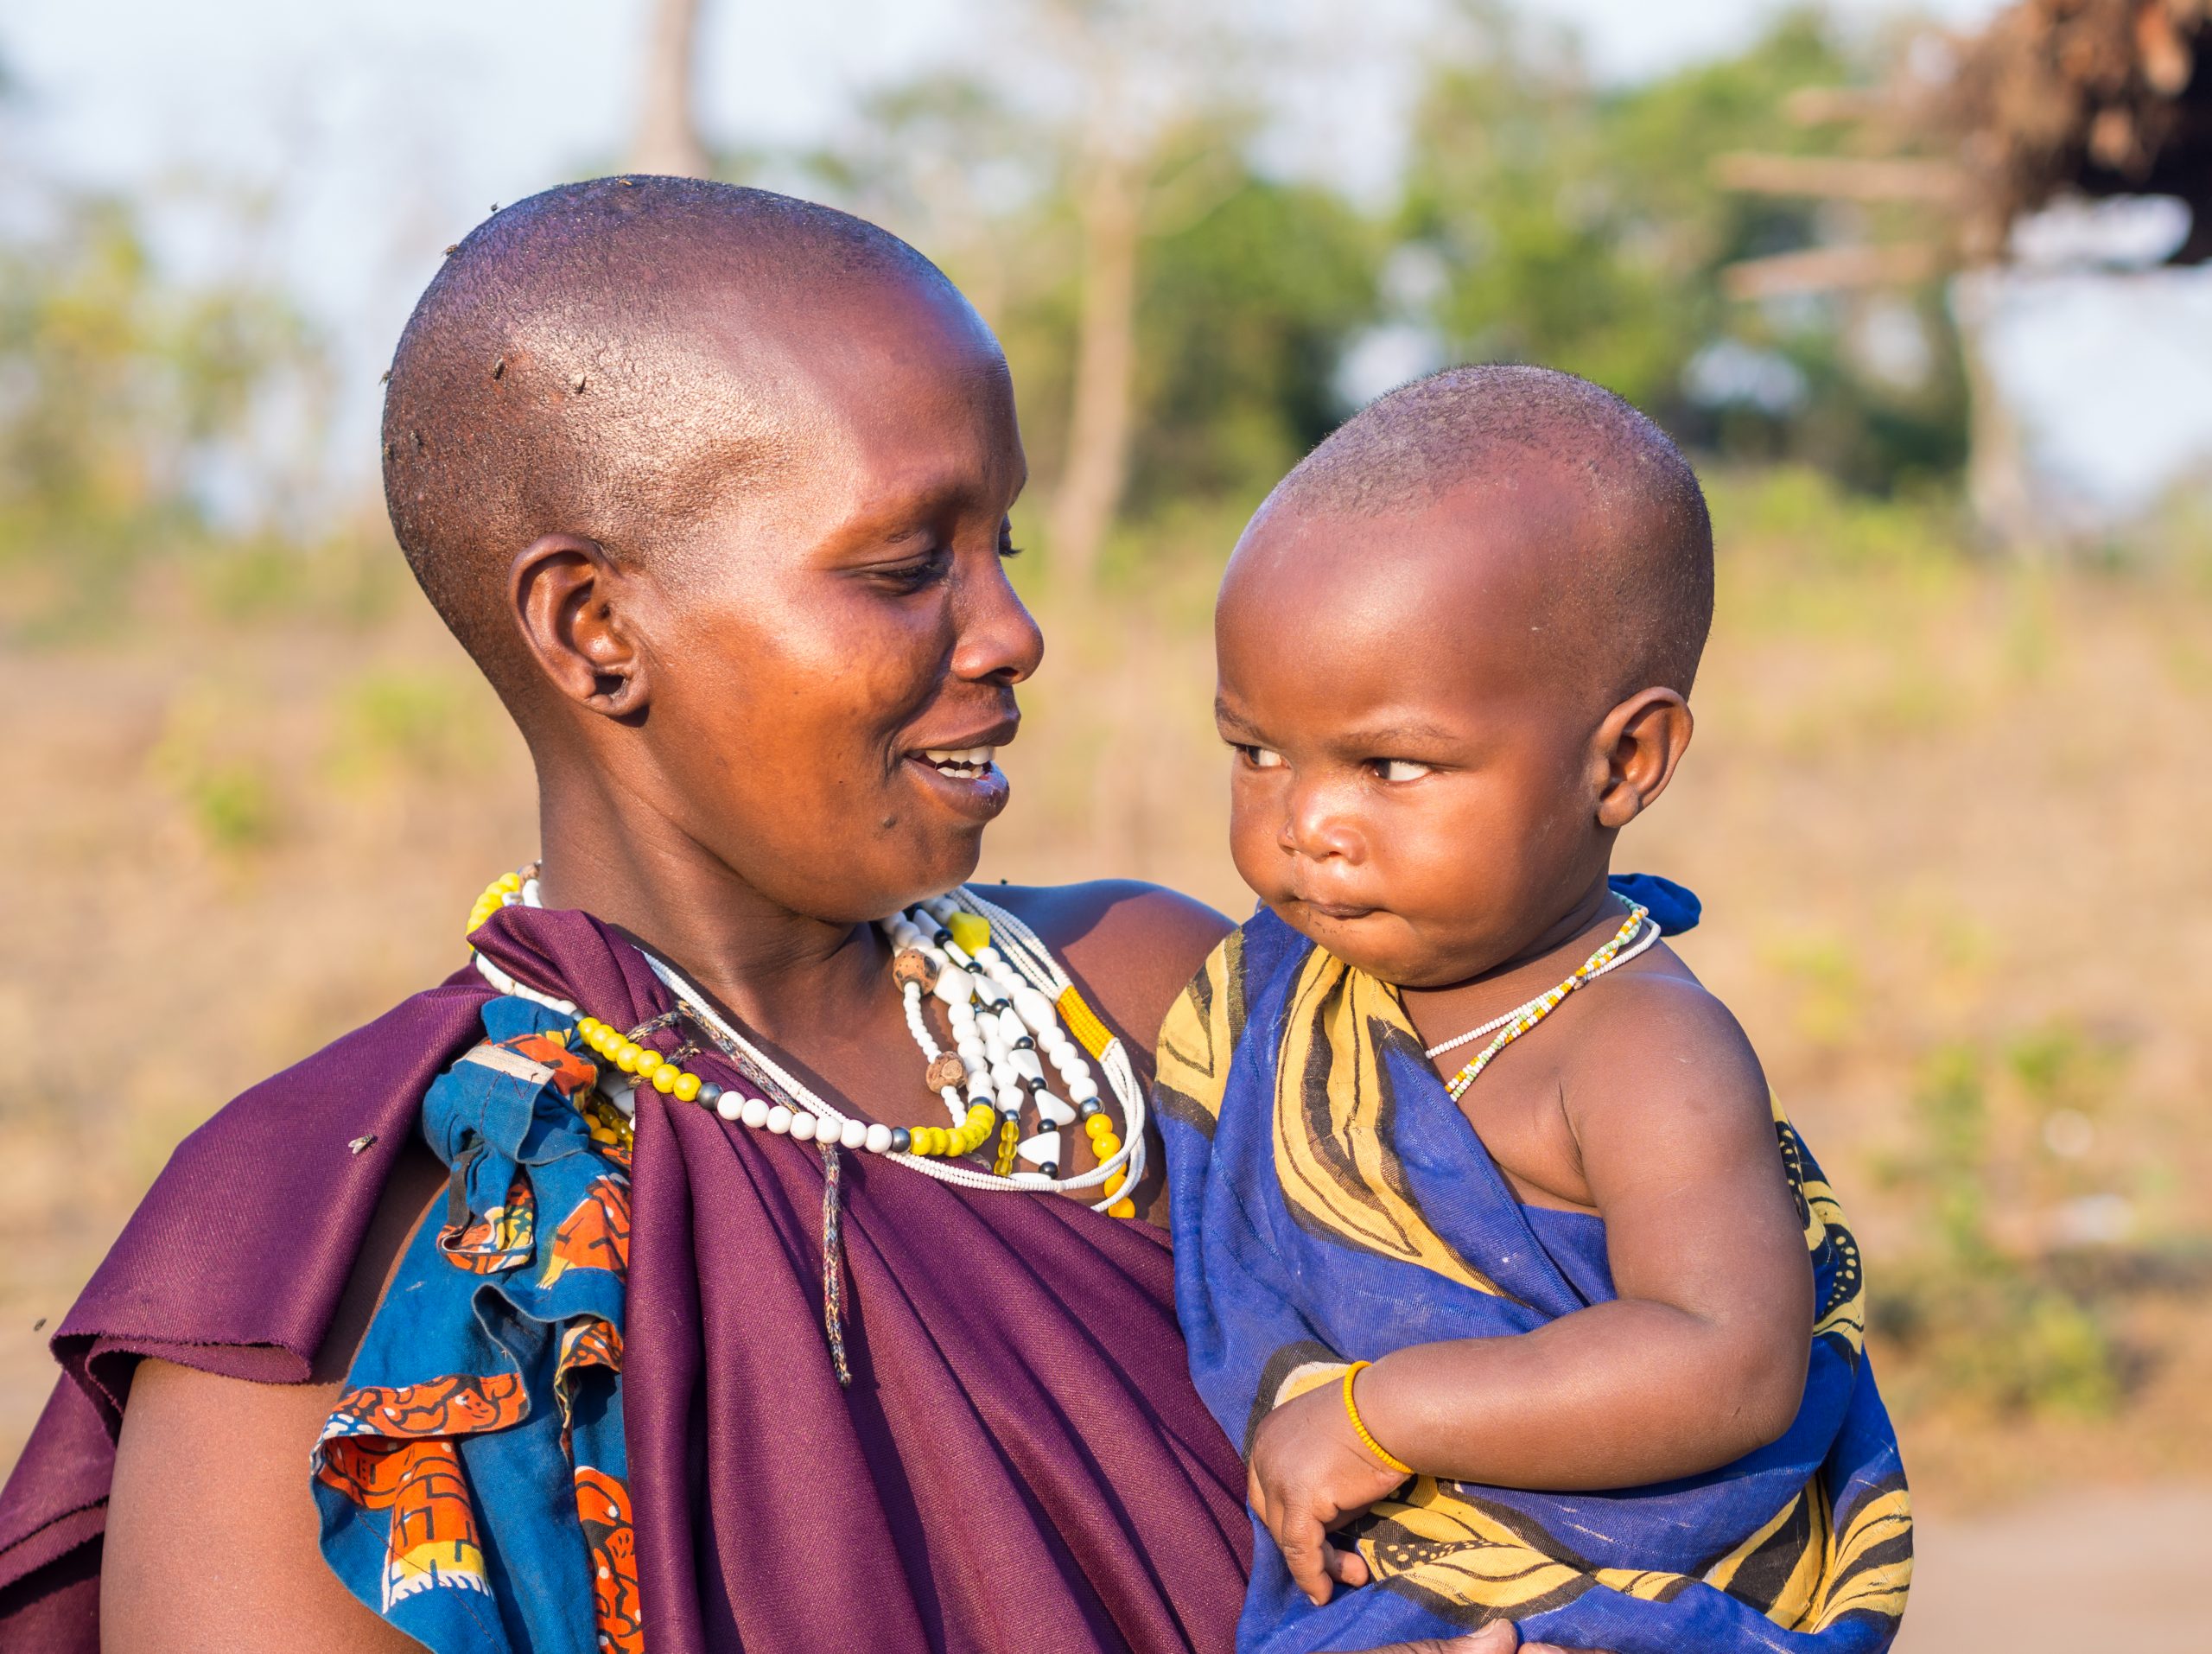 Handeni, Tanzania - August 01, 2015: Maasai mother with her child standing in front of a traditional house in their boma (village) in Tanzania, Africa, on a normal evening.